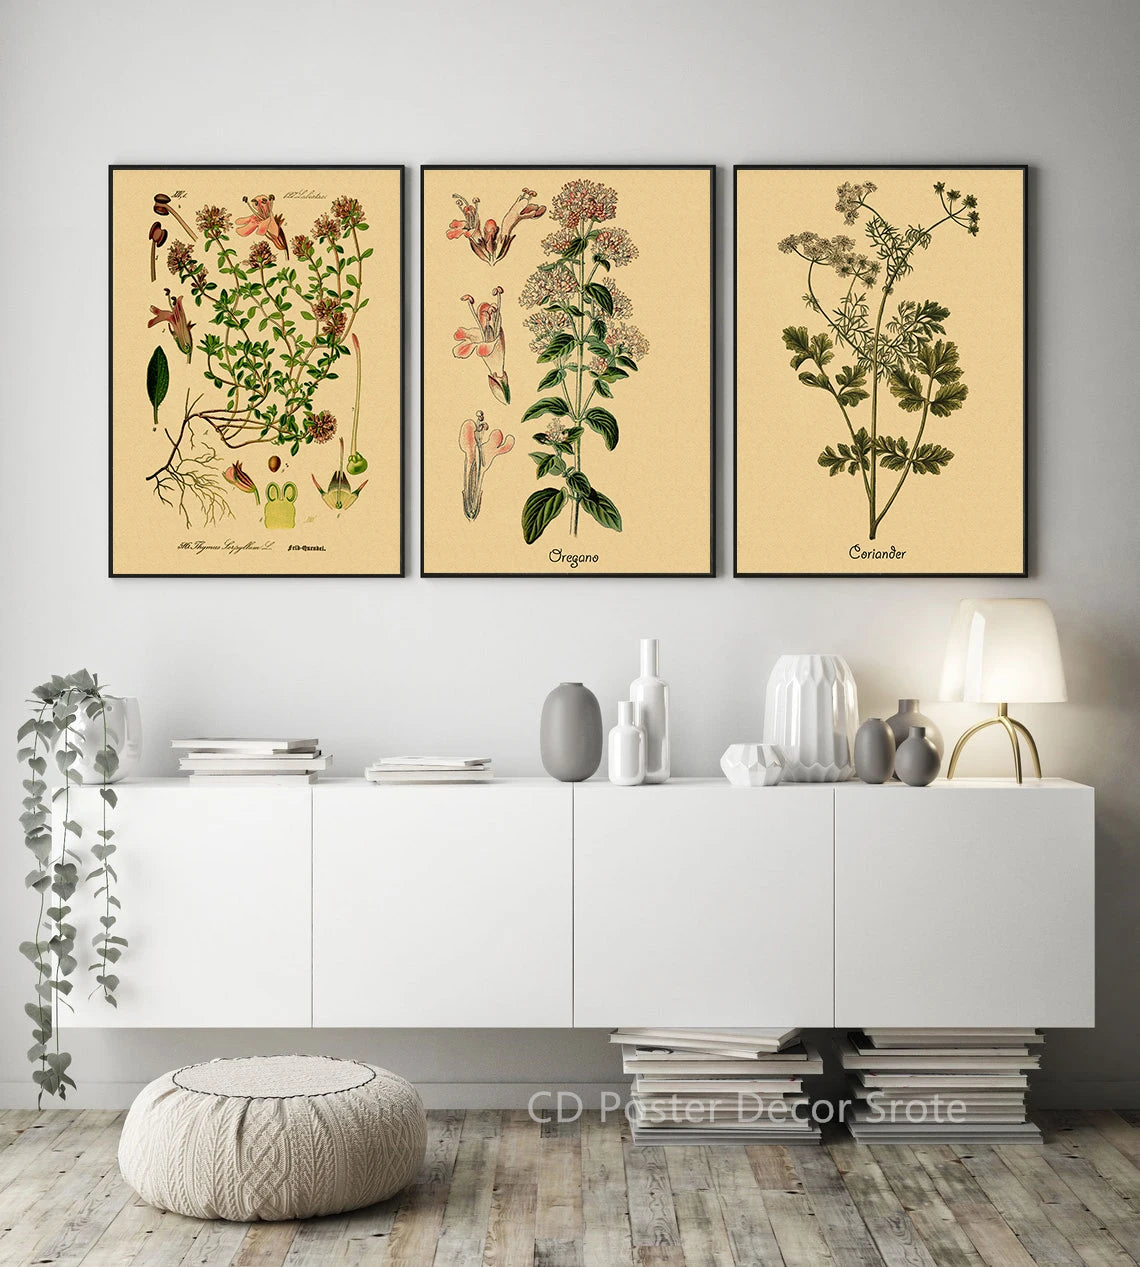 Culinary Herbs Poster Prints Flower Herbal Botanical Illustrations Kraft Paper Vintage Room Home Kitchen Art Wall Decor Painting - NICEART